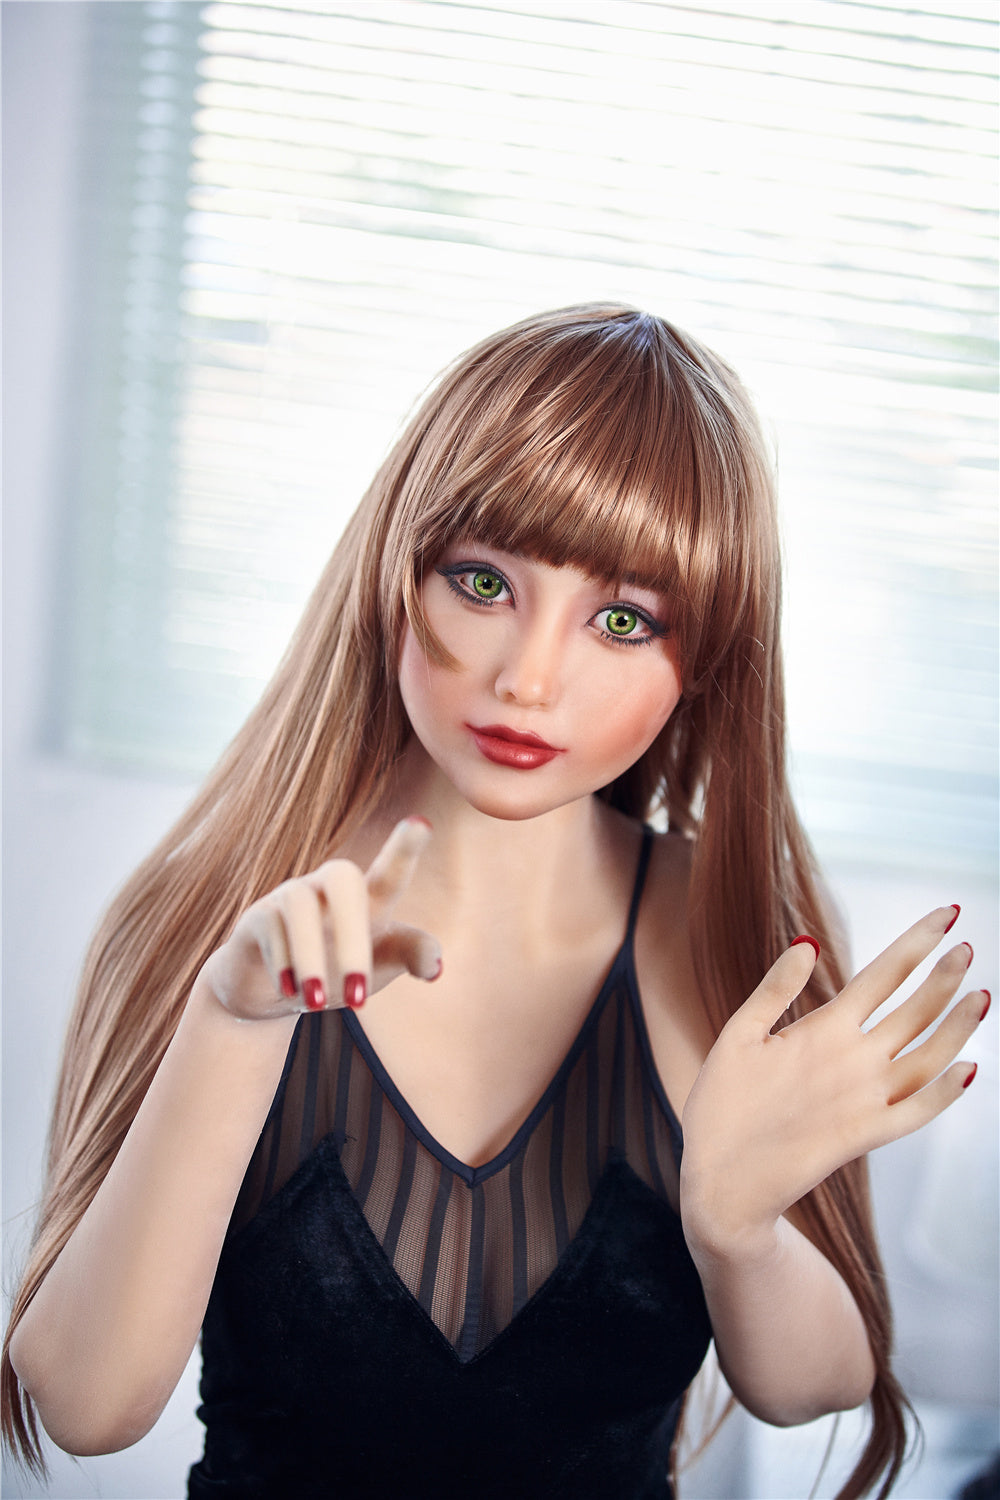 US Stock - SexDollBay Sarah 163cm #74 Head Real-Life Adult Love Doll Pulchritude FaceSex Dolls